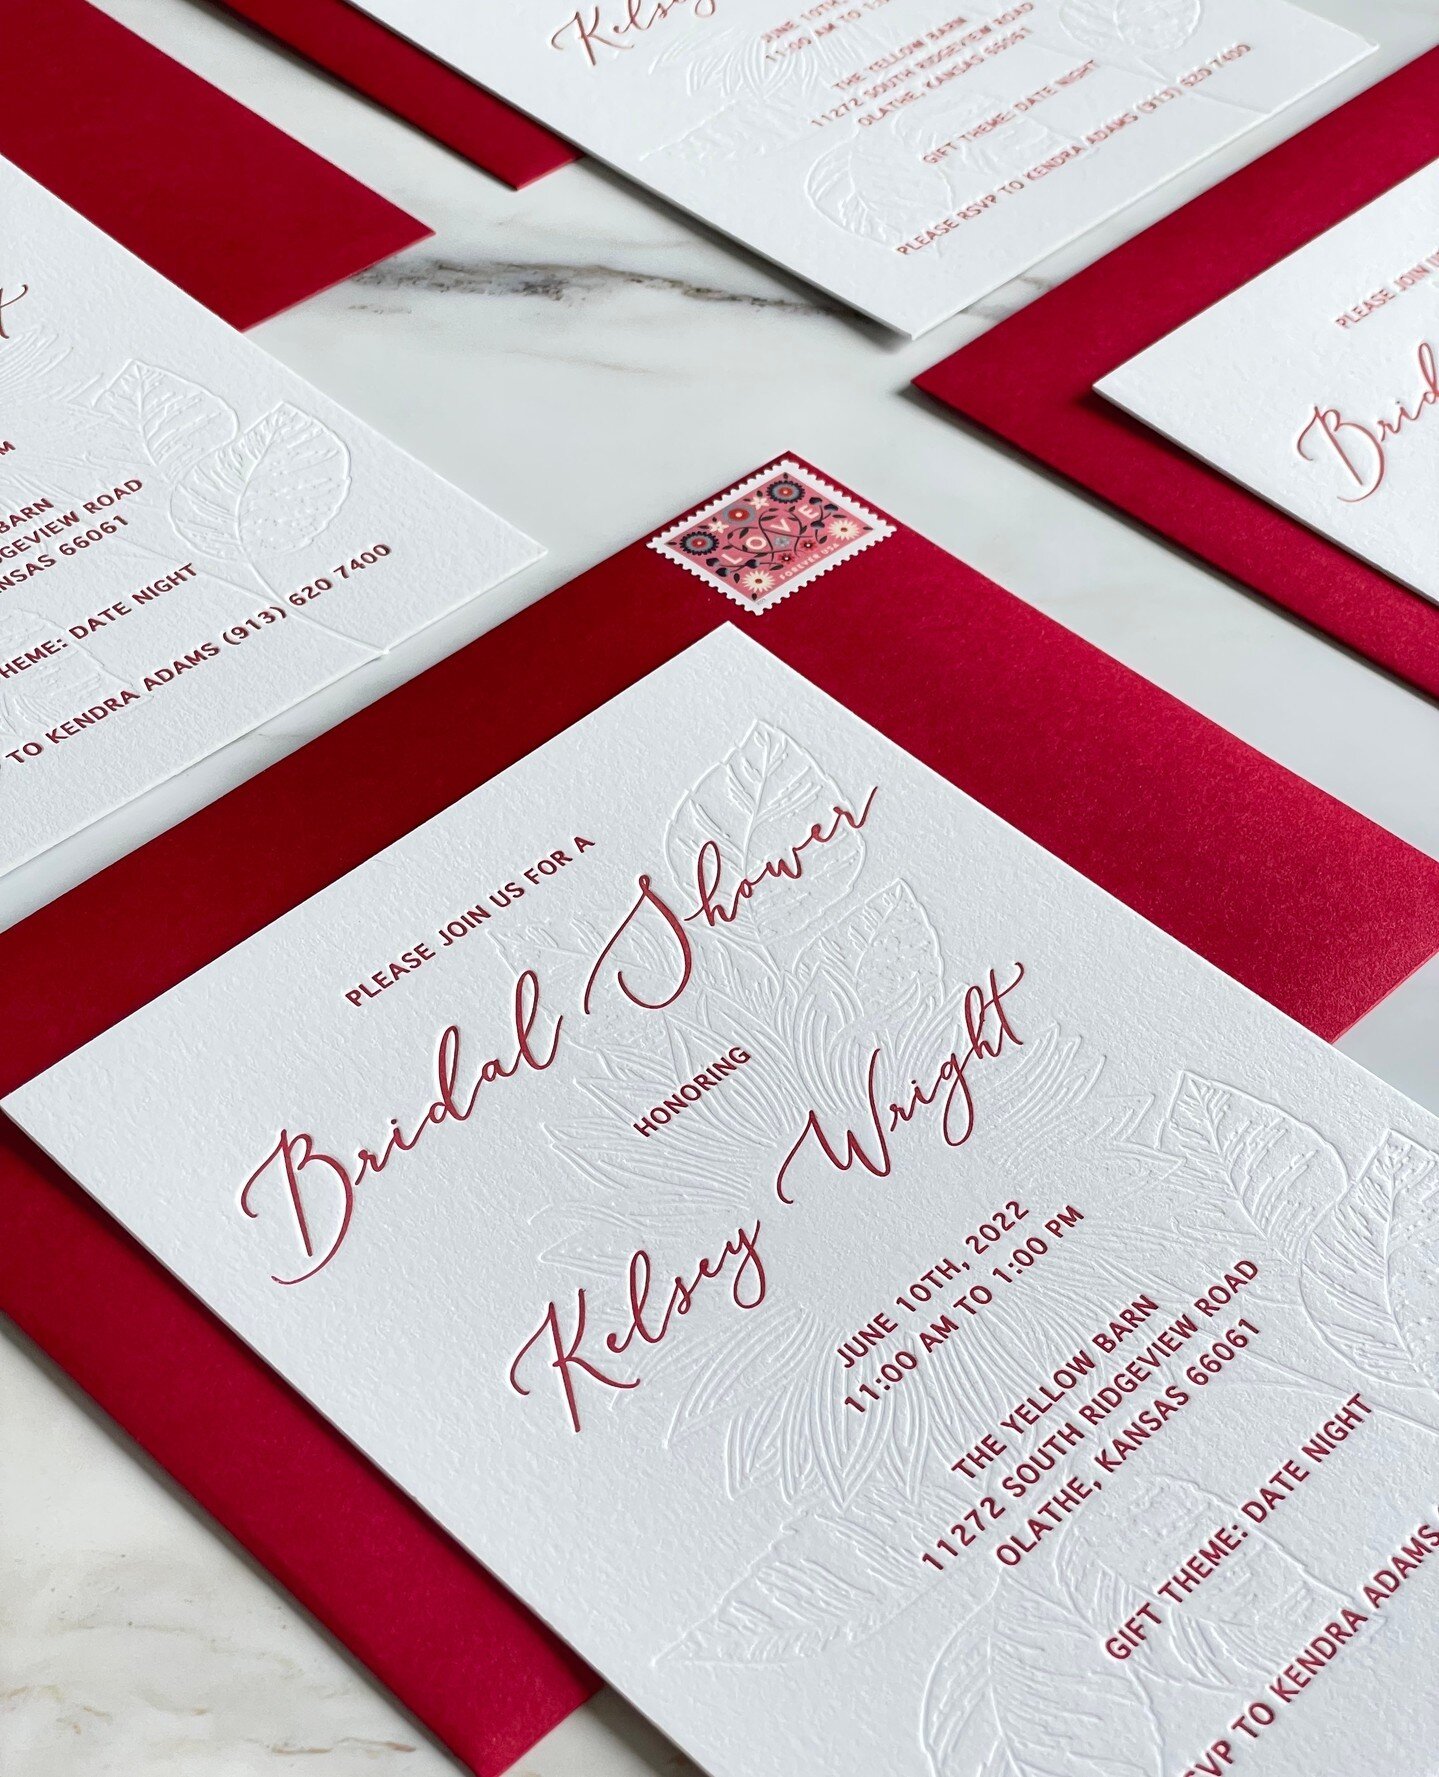 This invitation holds a special place in my heart as this is my first letterpress job, and who's the lucky client... MY SISTER! I had so much fun designing and surprising her with this invite. Even though this is my first letterpress job, it won't be